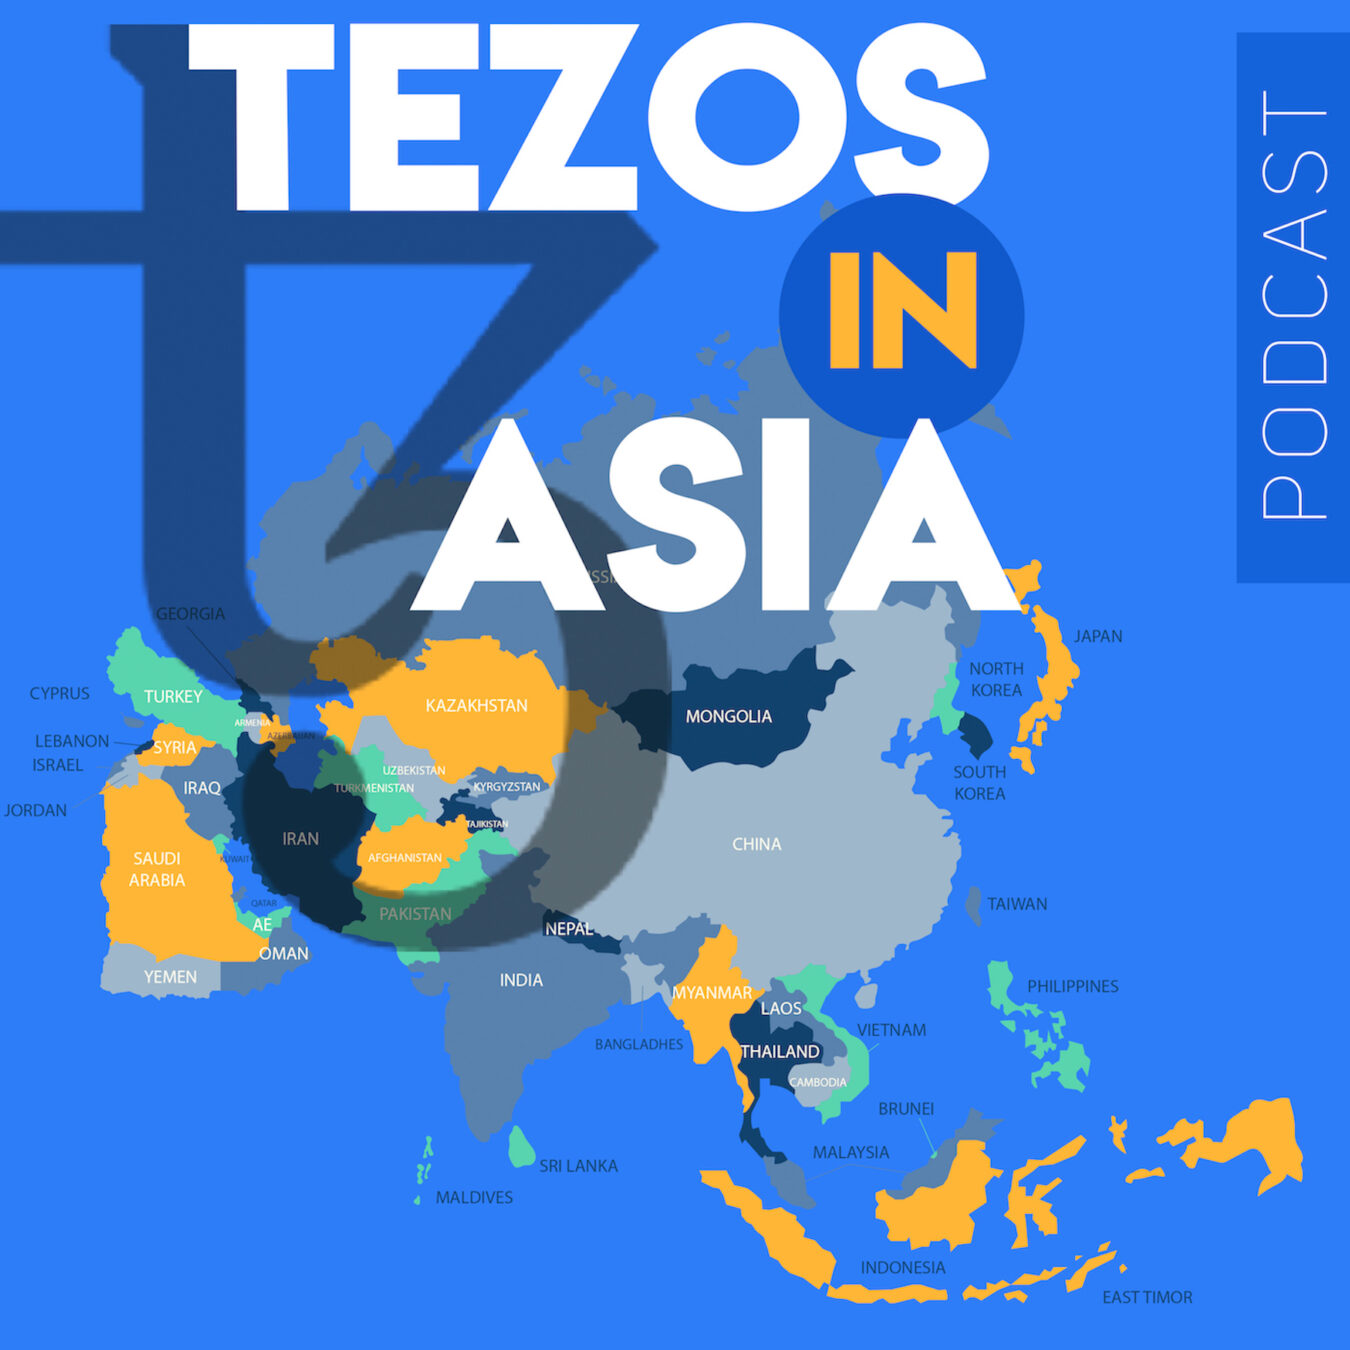 Podcast transcript with founder of Tezos Arthur Breitman and former Foundation board member Diego Olivier Fernandez Pons on the Tezos Communities in Asia